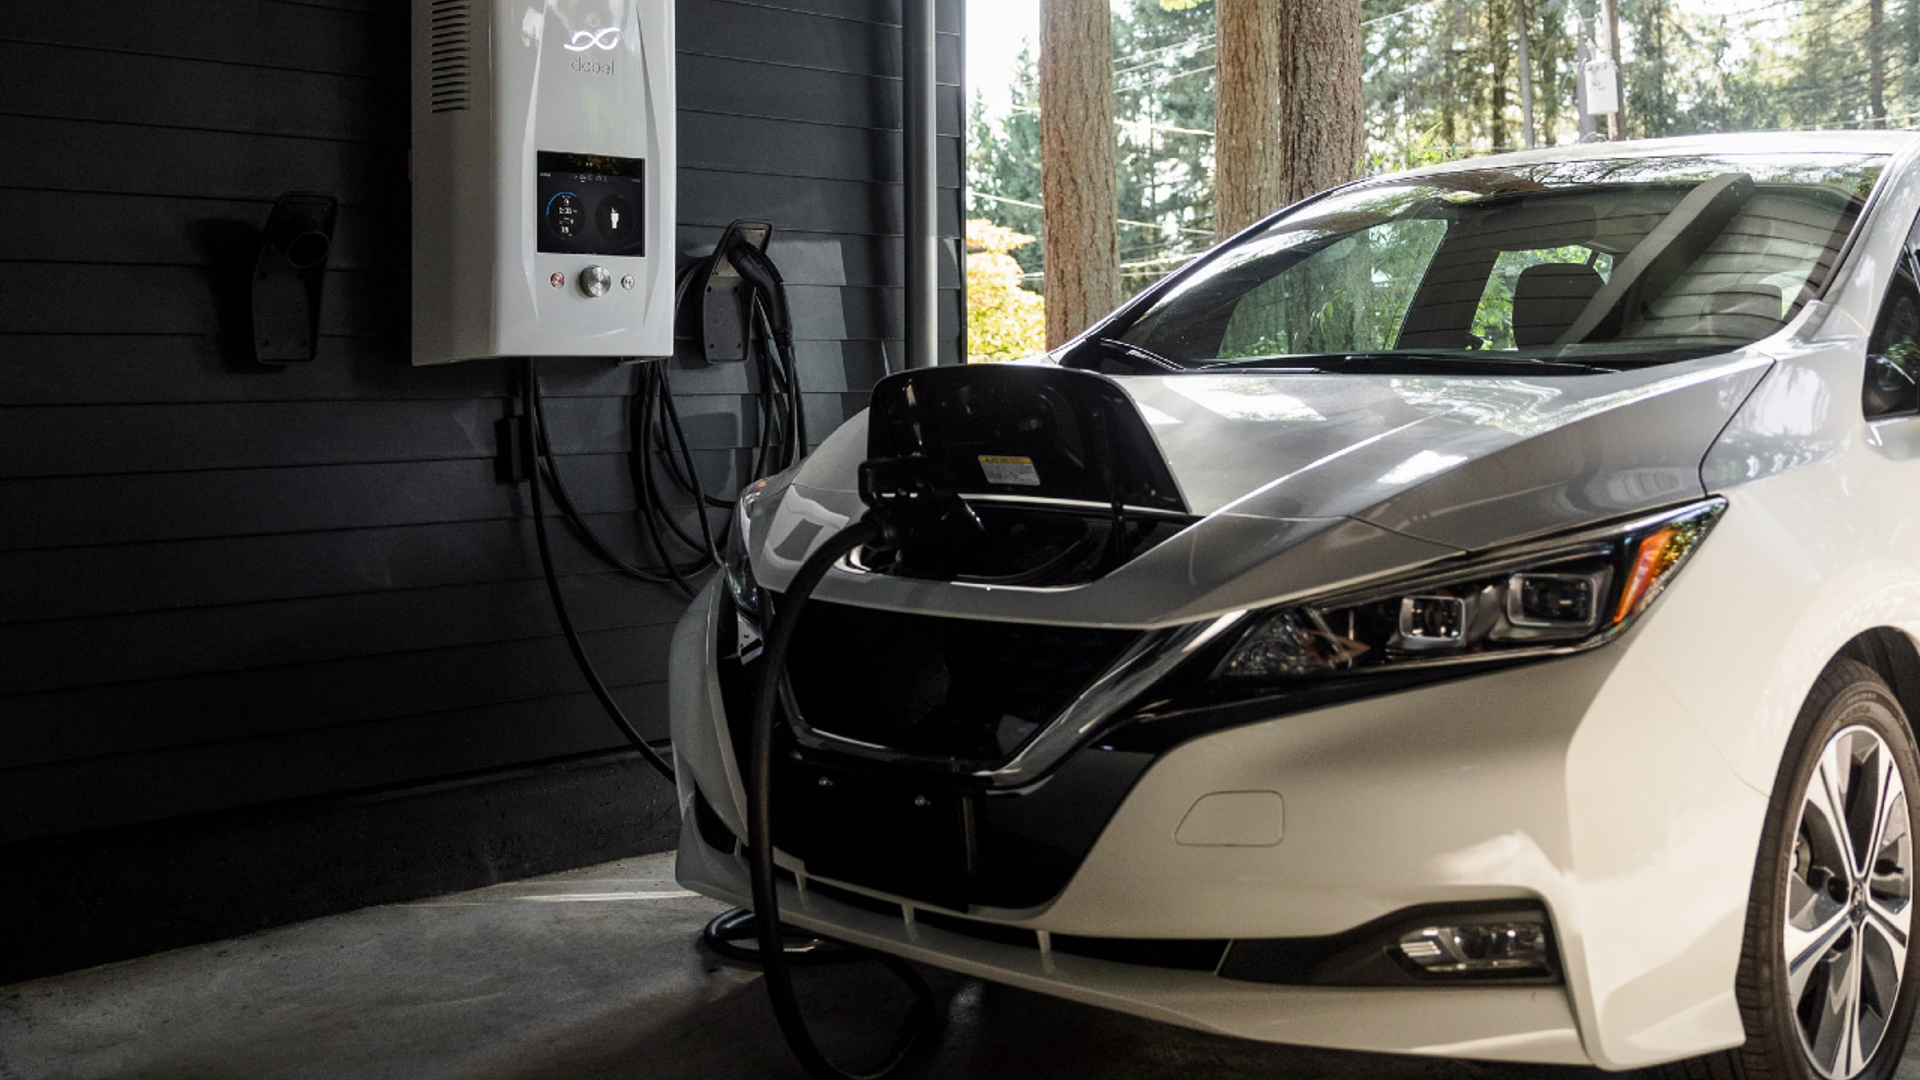 How the Nissan Leaf Introduced EV Cars to the UK